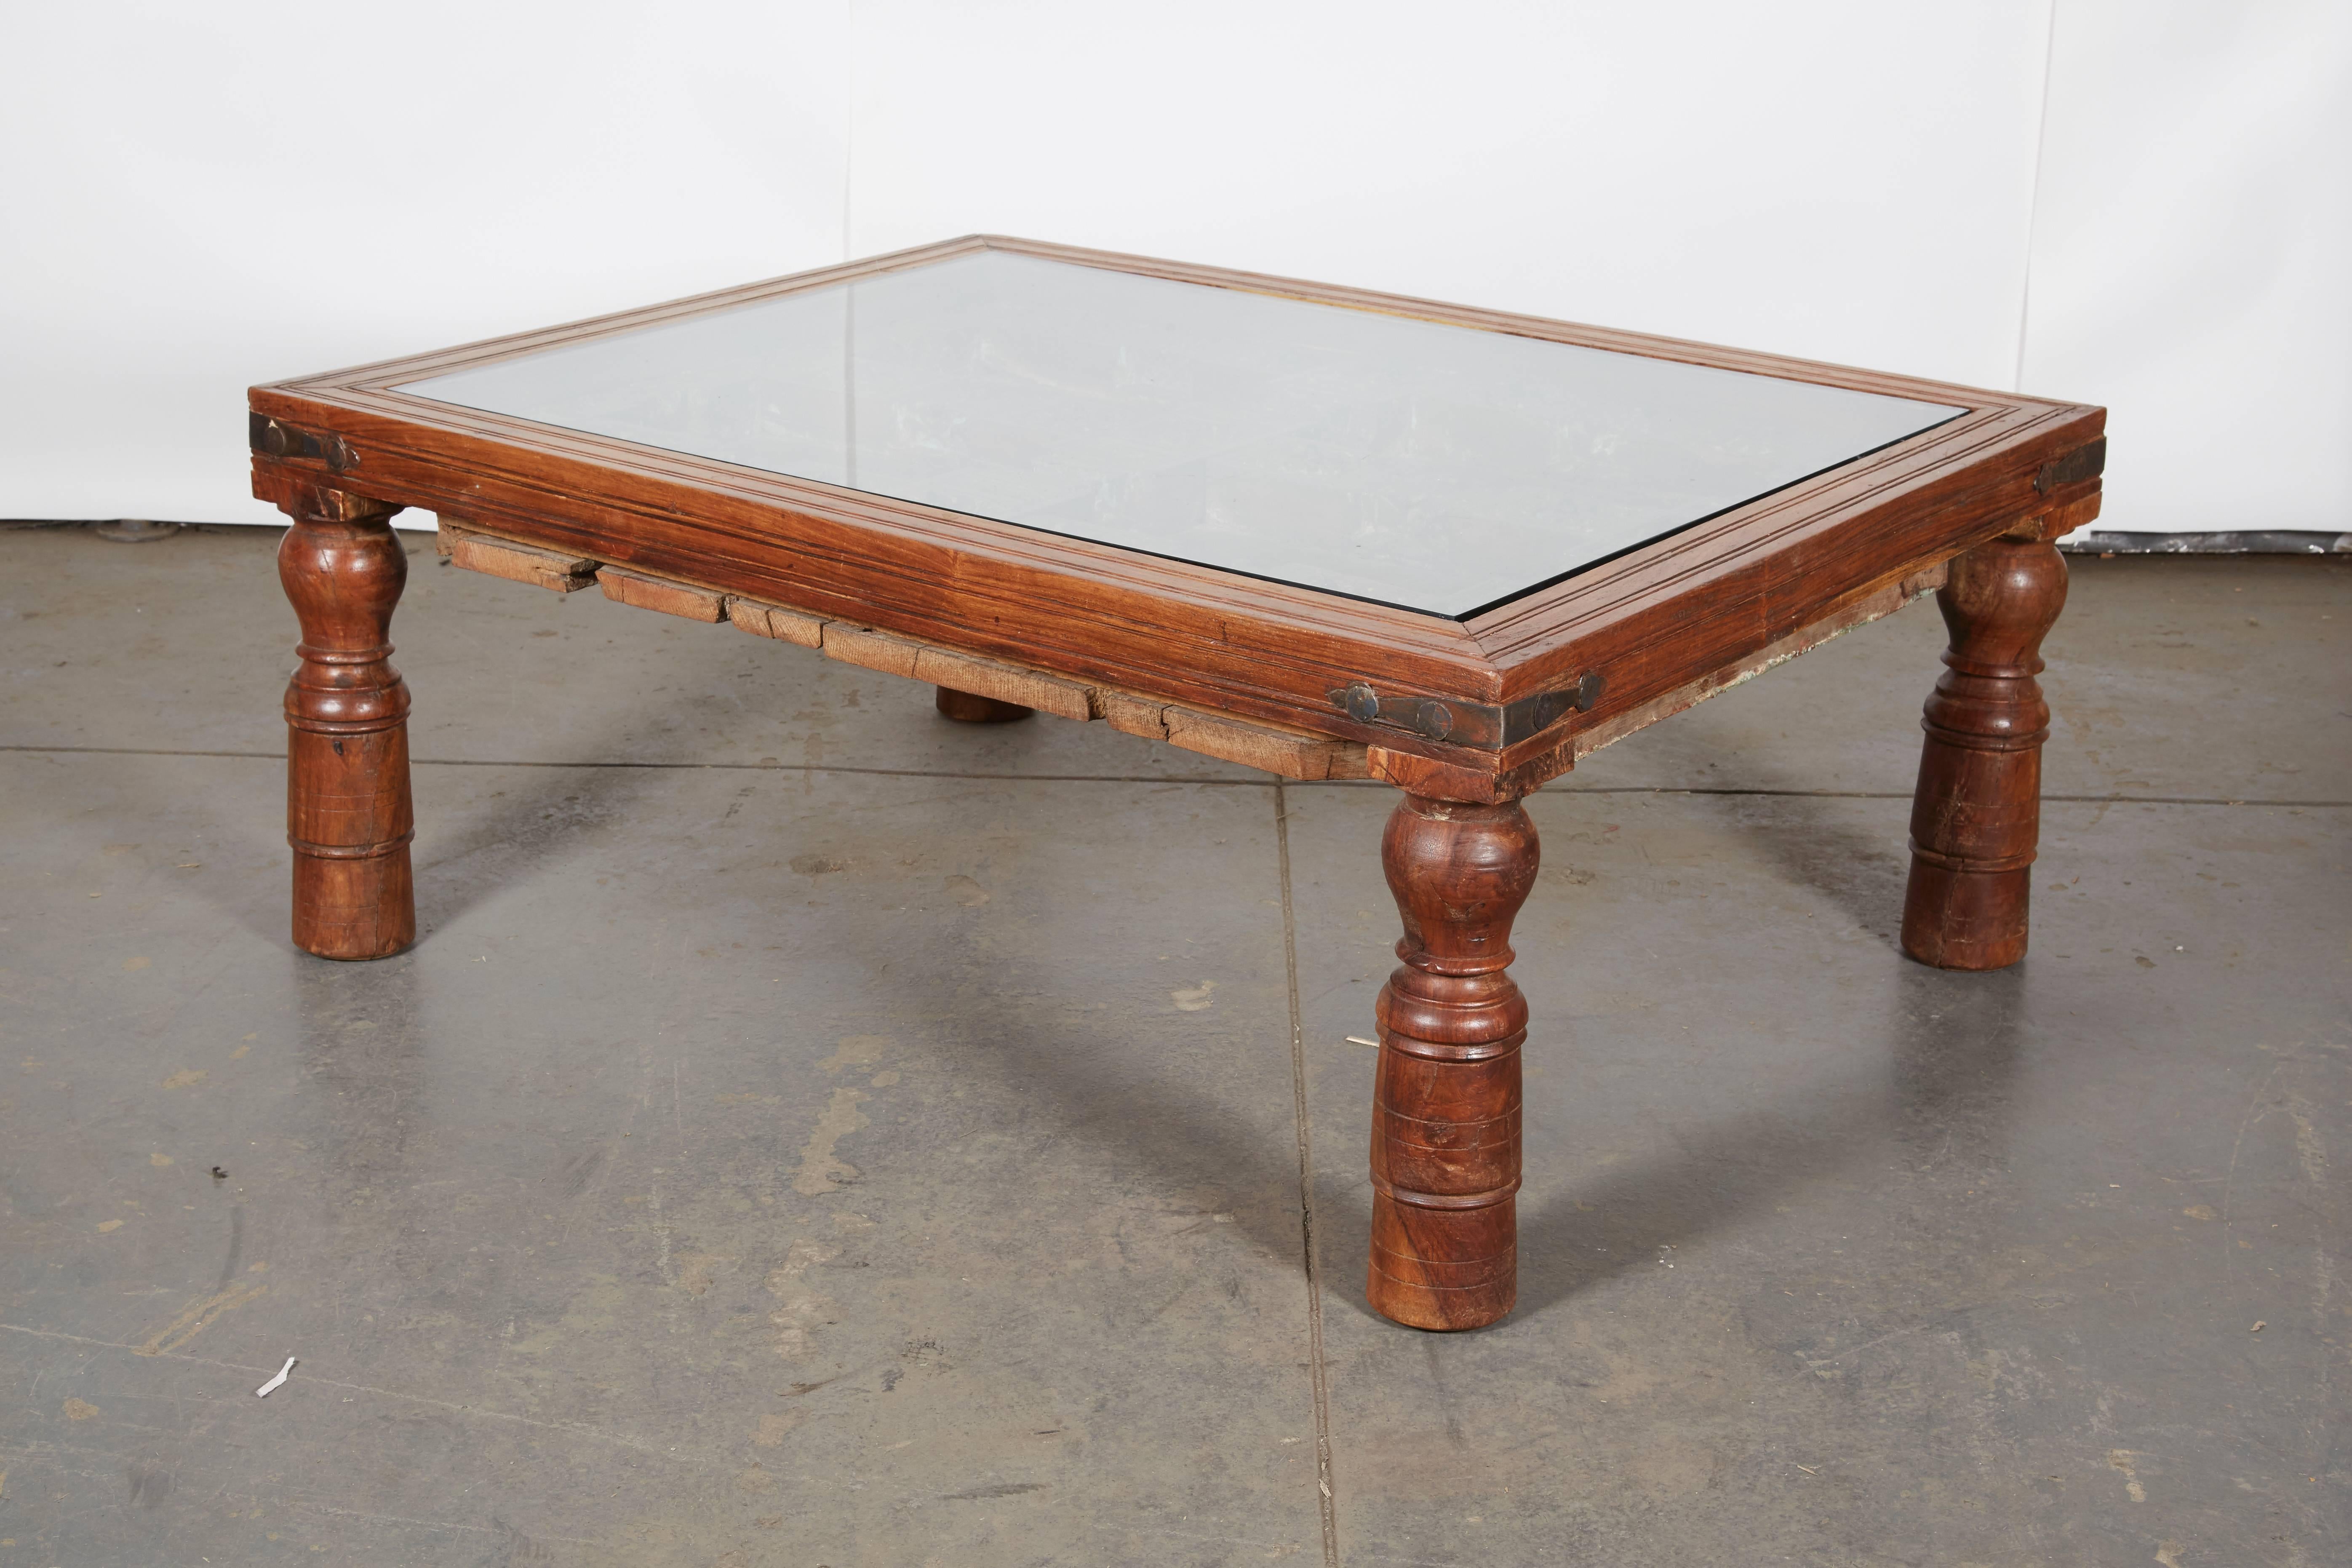 The nearly square top incorporating an antique Indian carved door with clear glass set above.